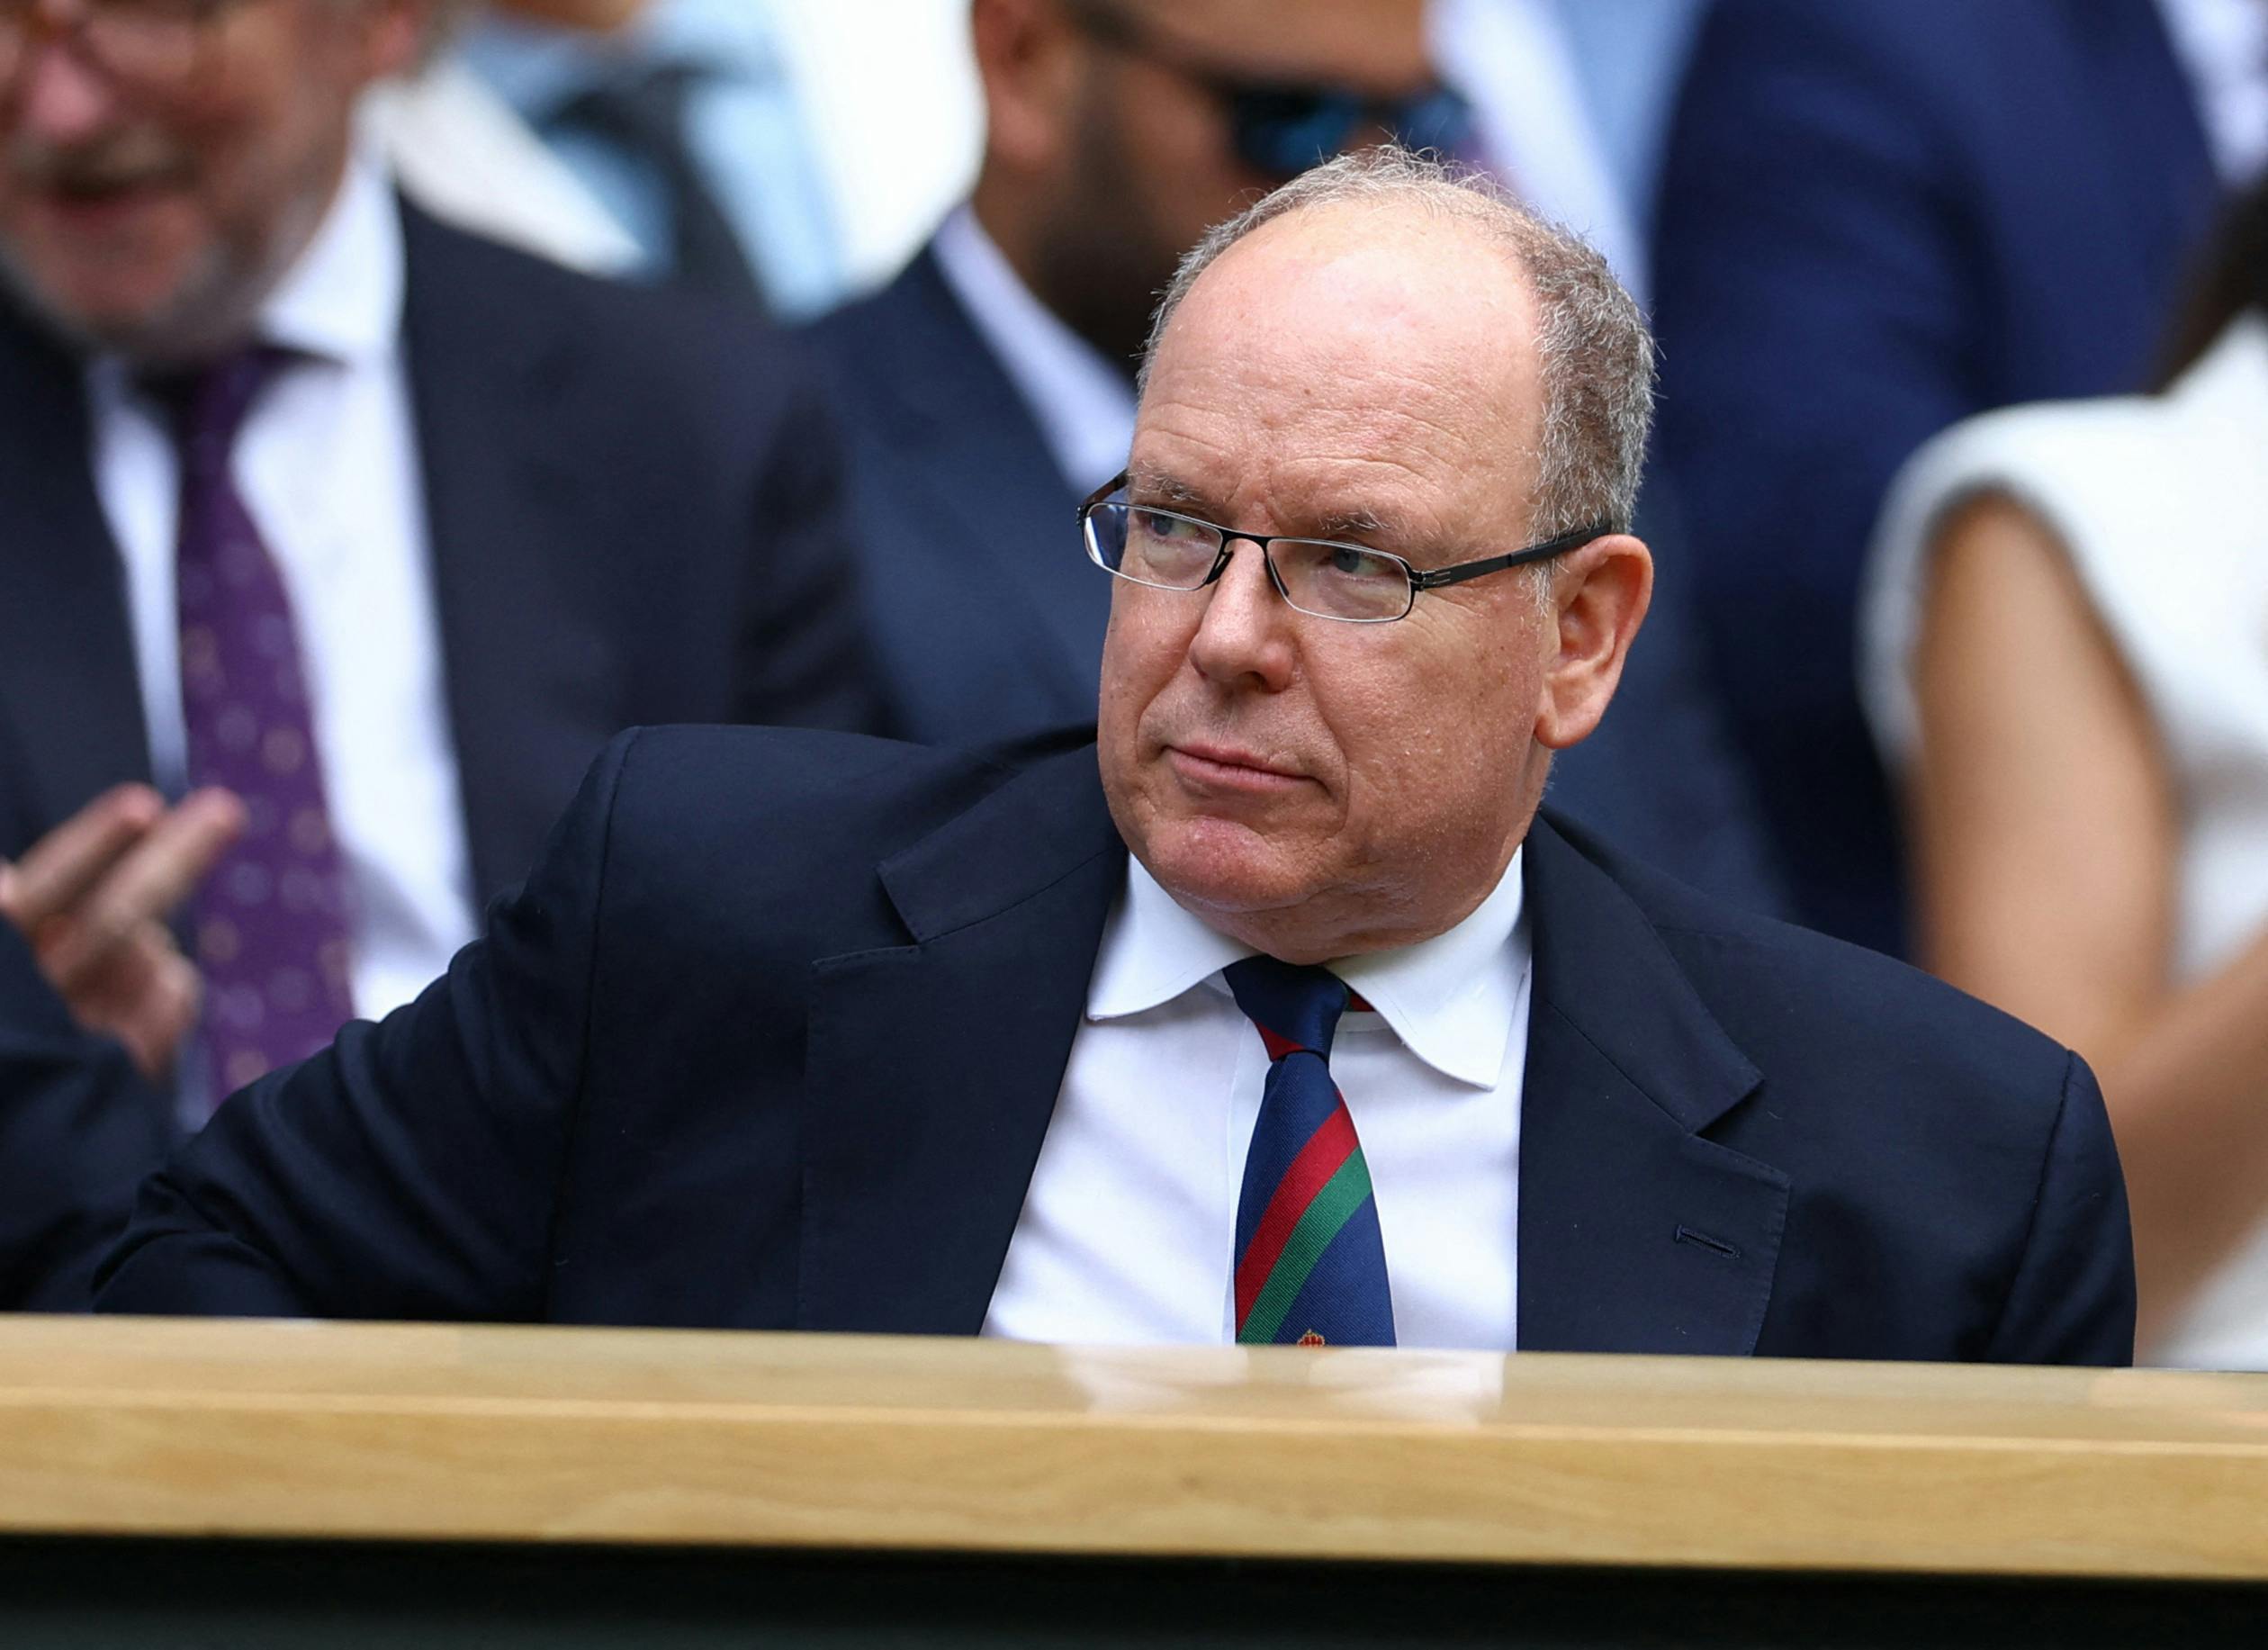 Tennis - Wimbledon - All England Lawn Tennis and Croquet Club, London, Britain - July 12, 2023 Prince Albert II of Monaco in the royal box on centre court before the start of play REUTERS/Hannah Mckay